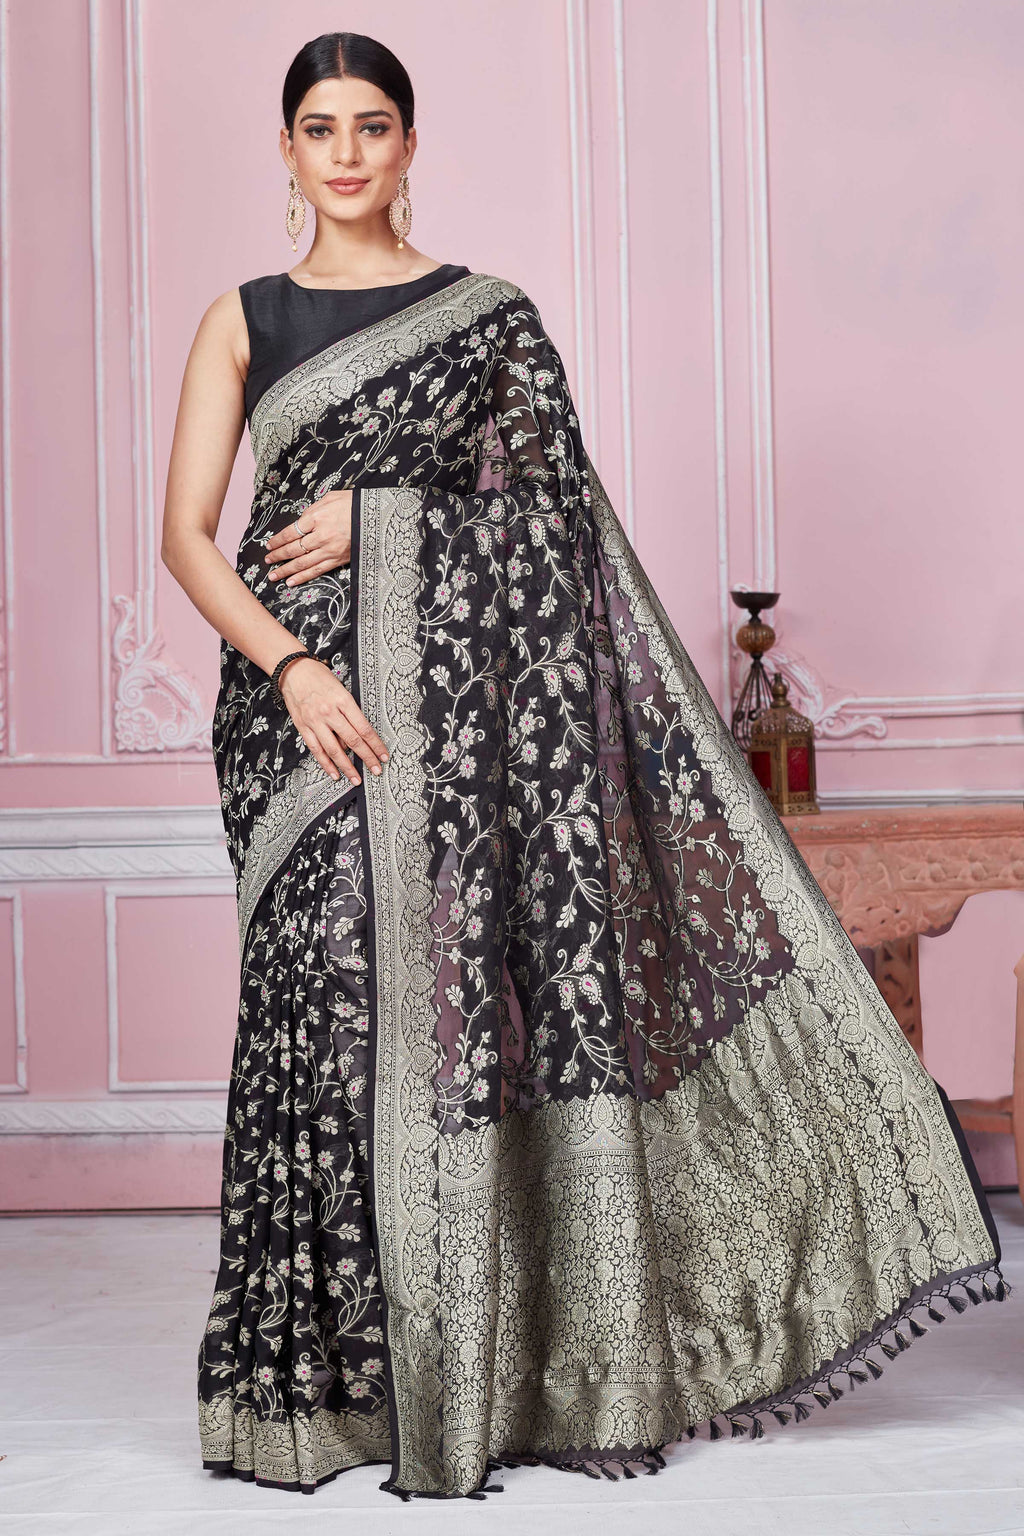 Shop black Banarasi sari online in USA with floral zari jaal. Look your best on festive occasions in latest designer sarees, pure silk saris, Kanchipuram silk sarees, handwoven sarees, tussar silk saris, embroidered sarees from Pure Elegance Indian fashion store in USA.-full view